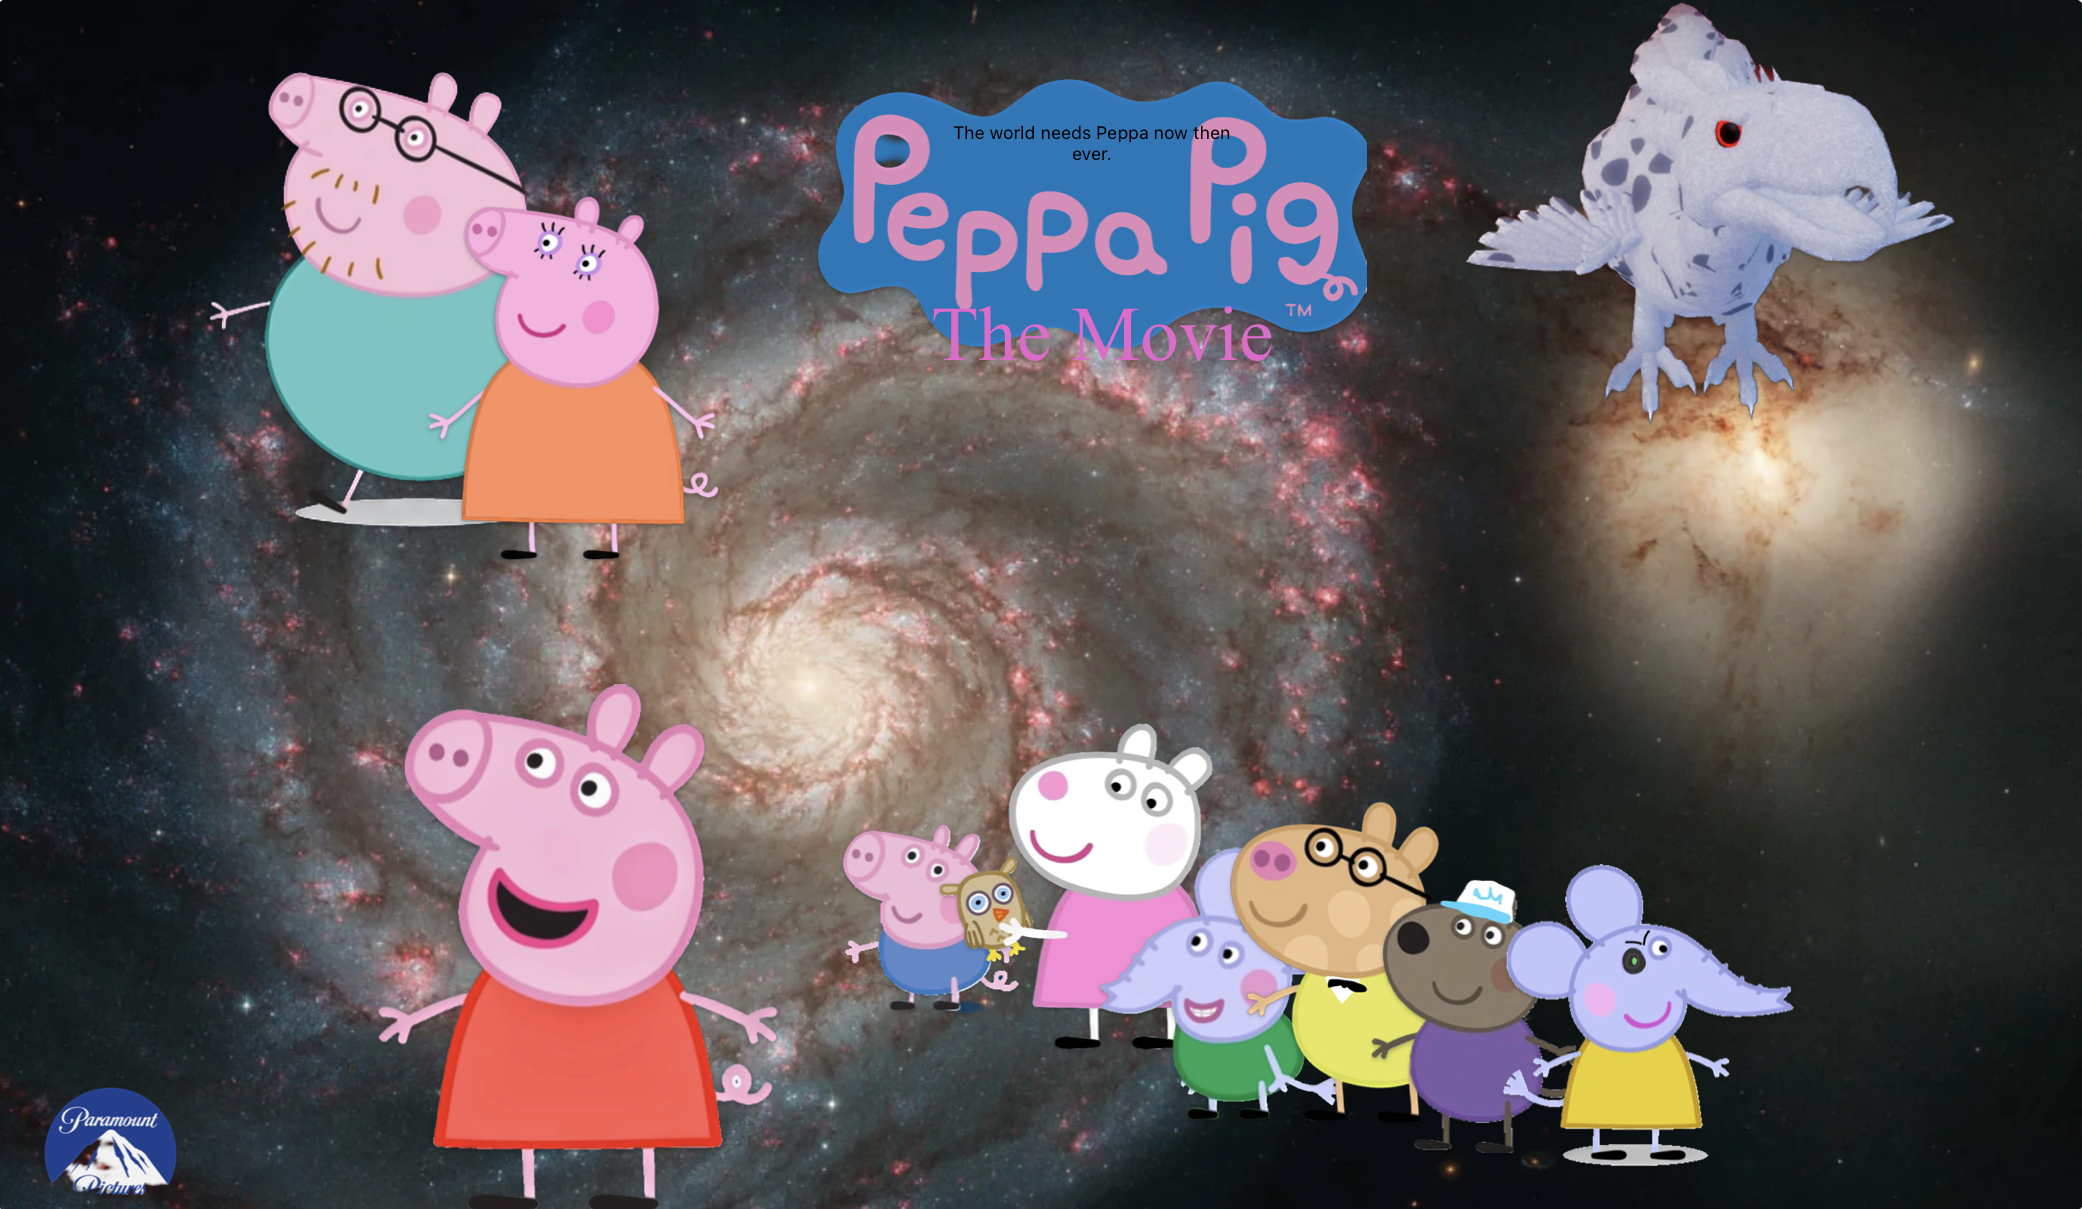 New series of Peppa Pig in the works